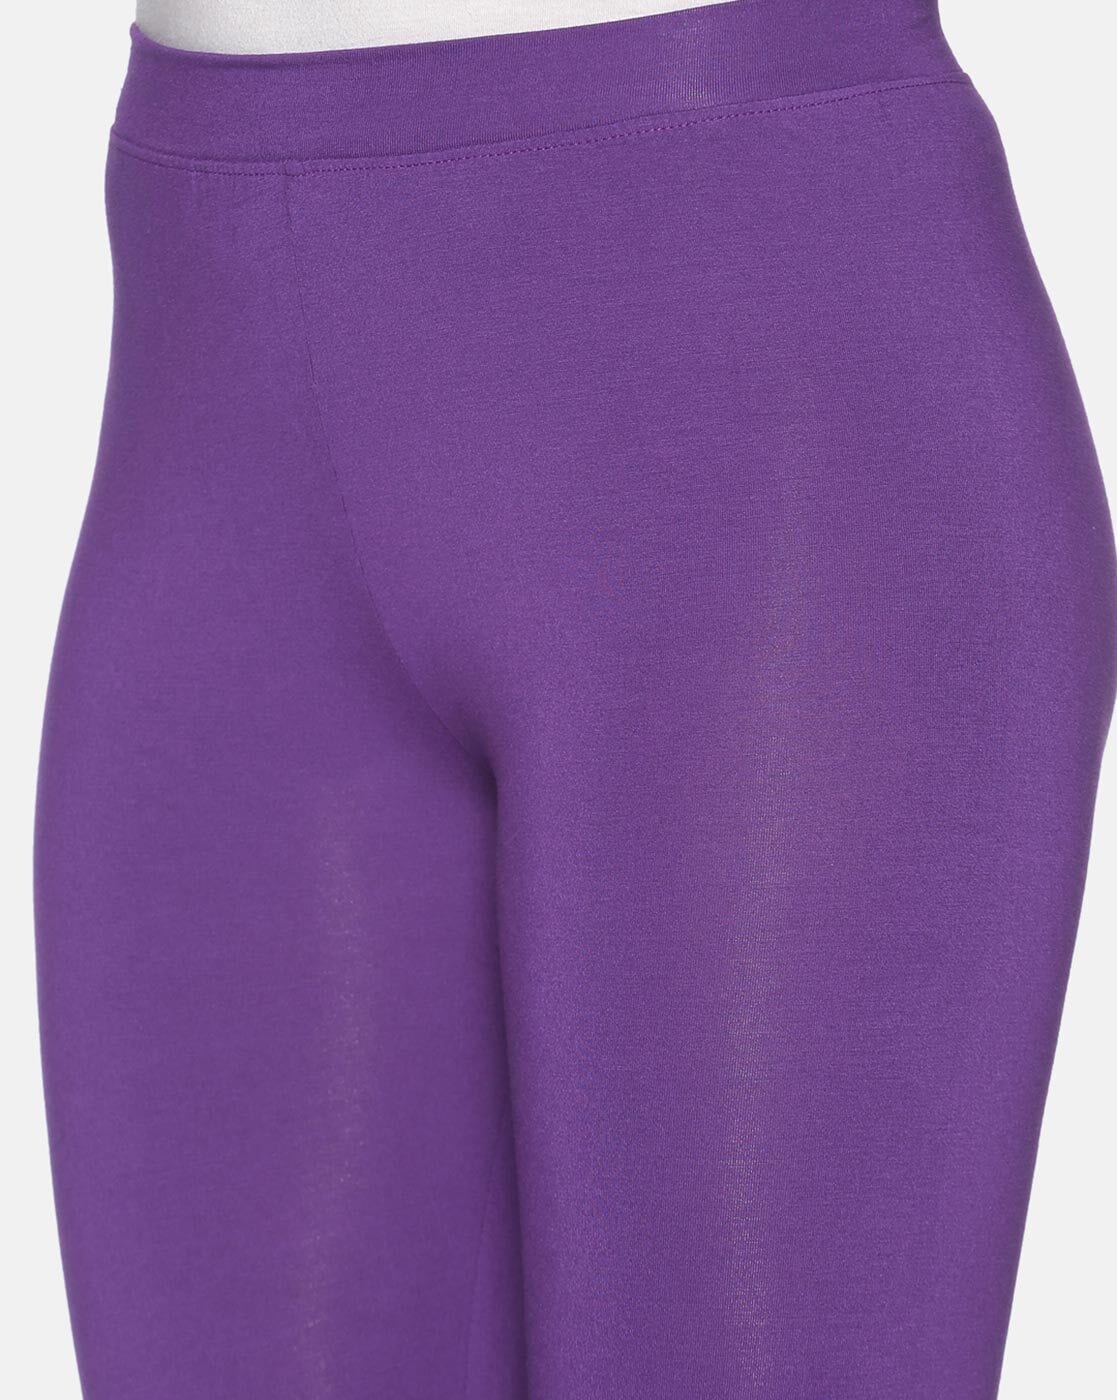 Avia Womens Core Performance Purple Leggings Size S (4-6) New With Tags